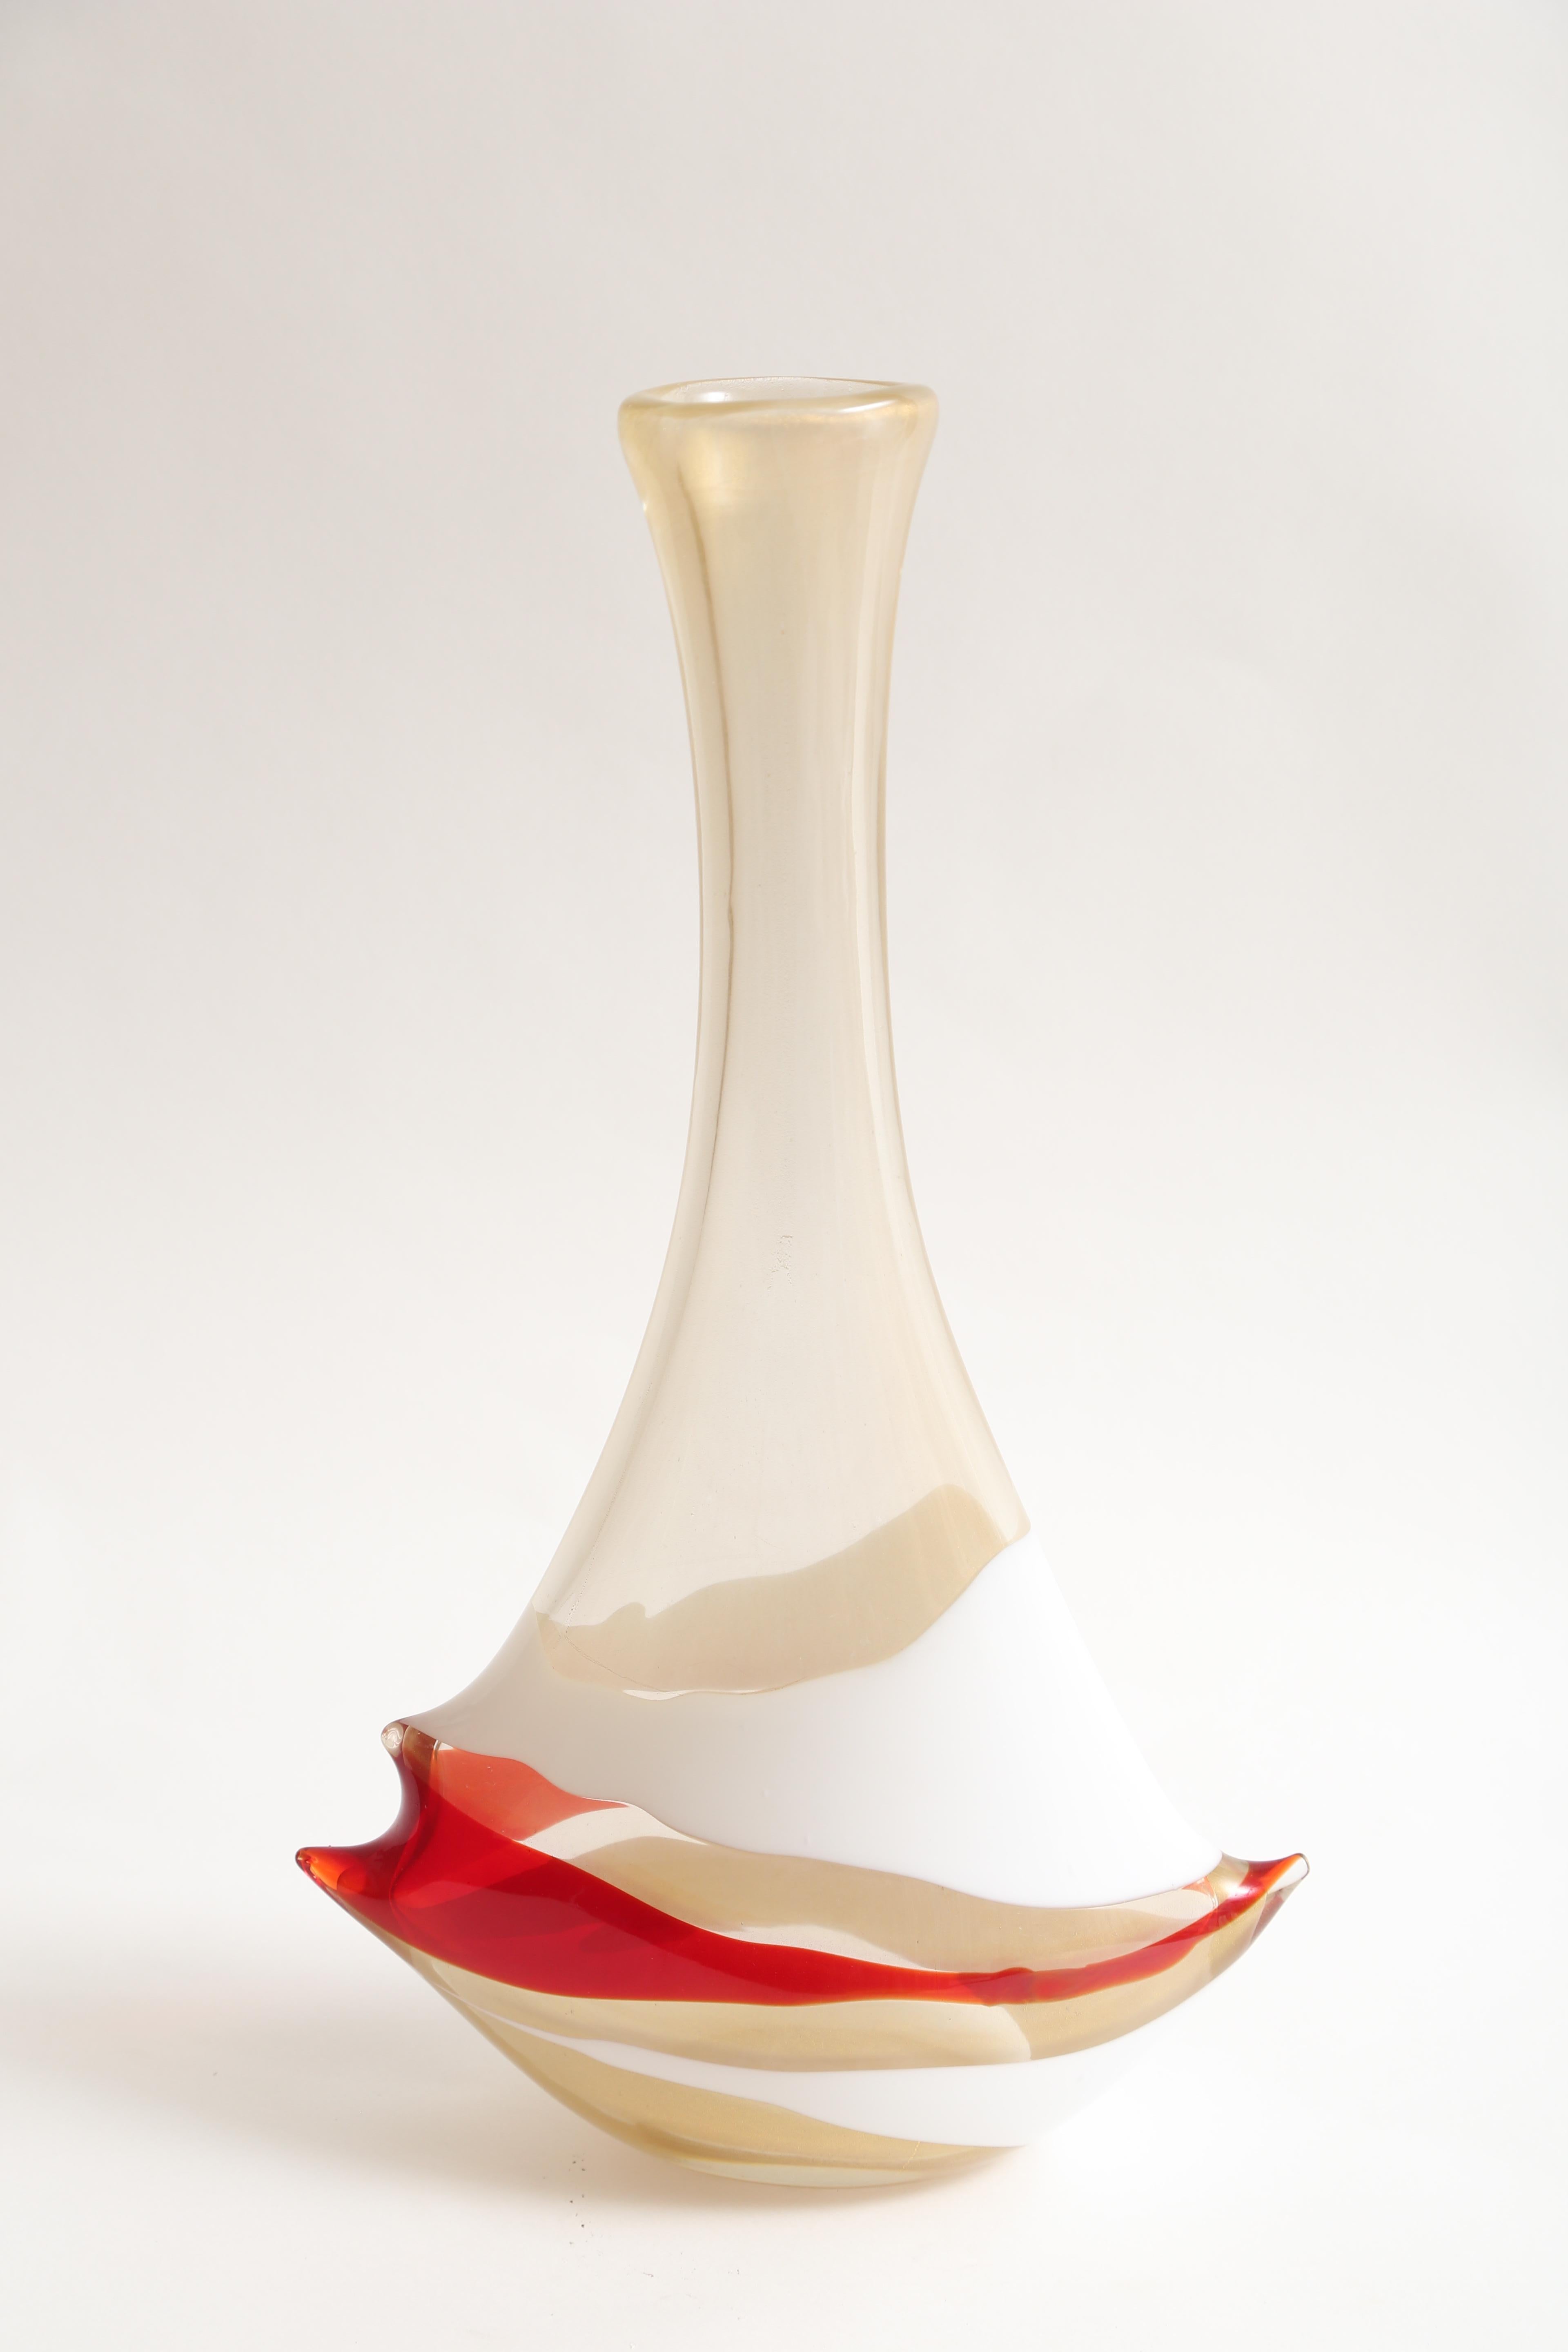 A hallmark design created at AVEM in 1955.
The vase combines a color field painterly quality with an organic amorphism.